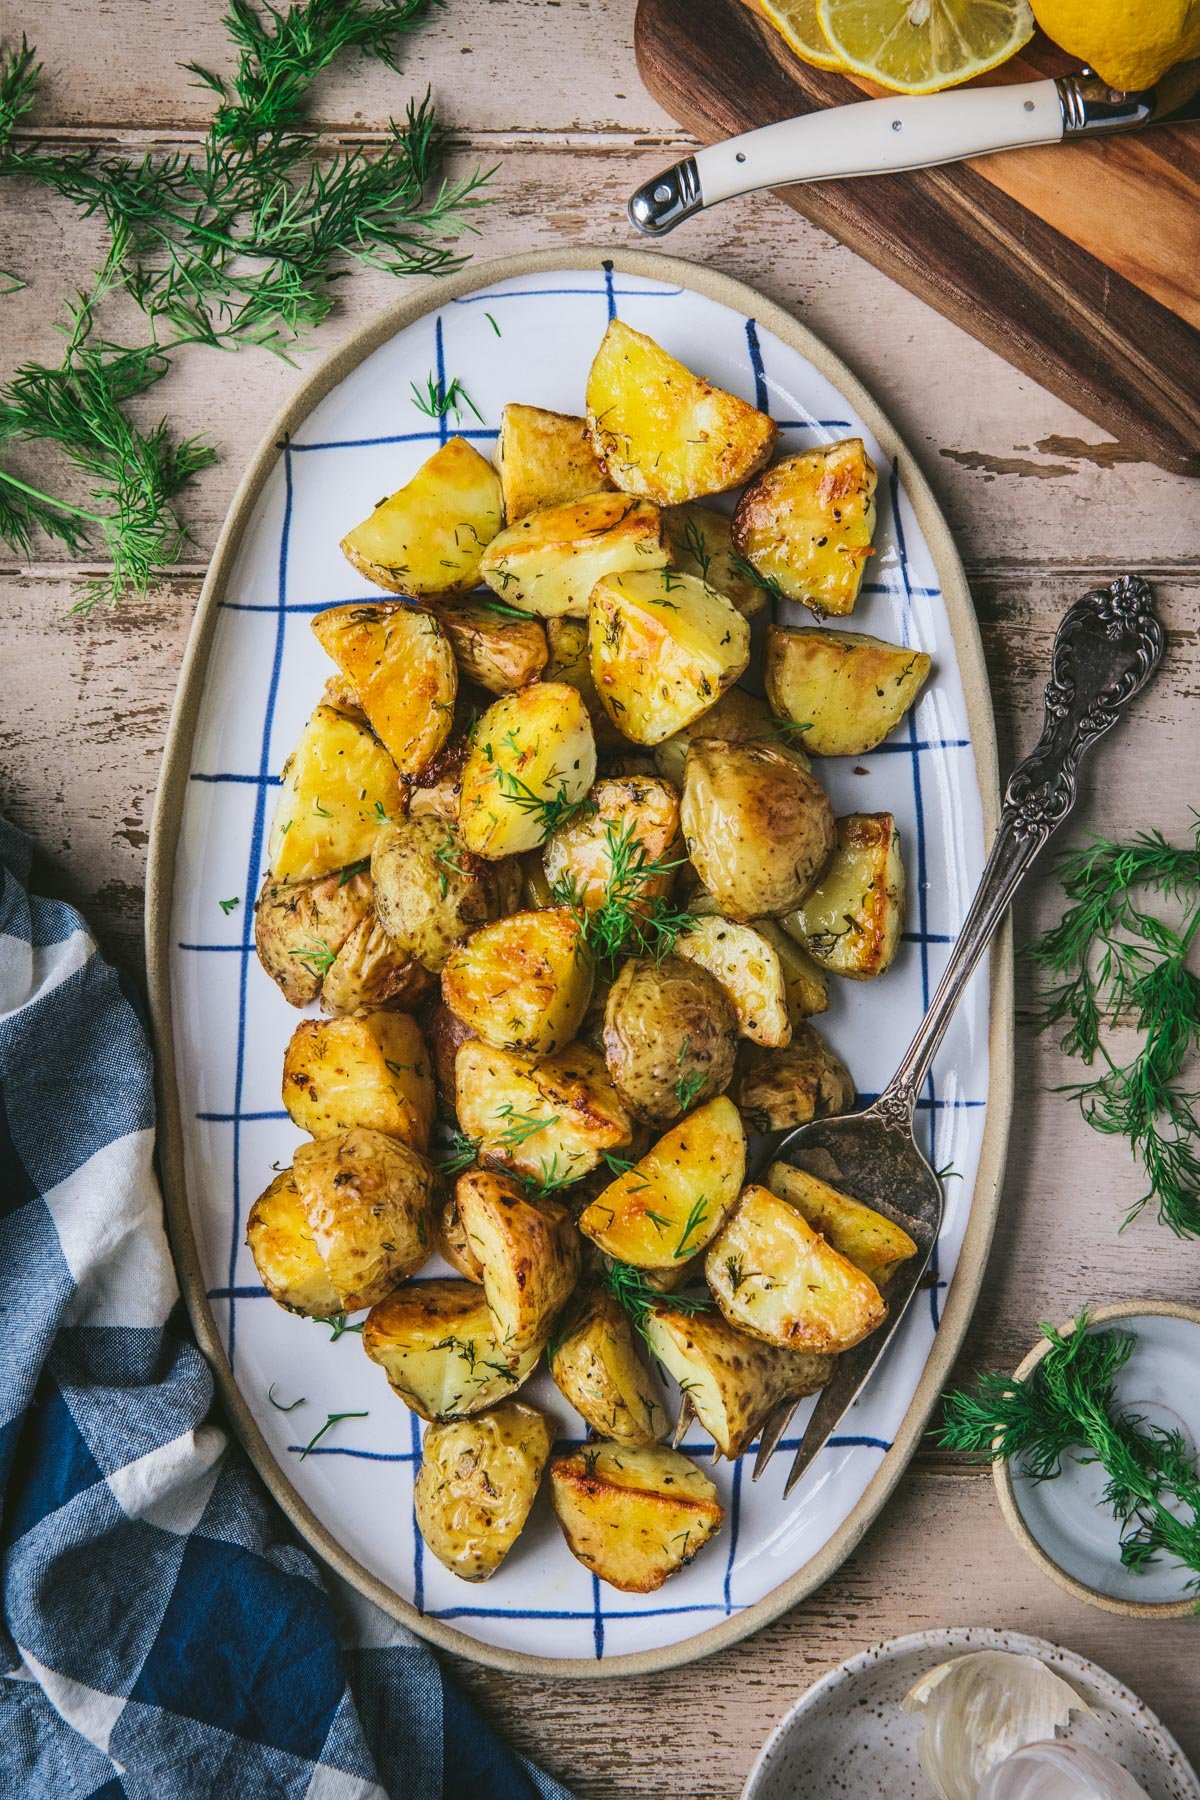 Tray of dill baked potatoes on a wooden table.